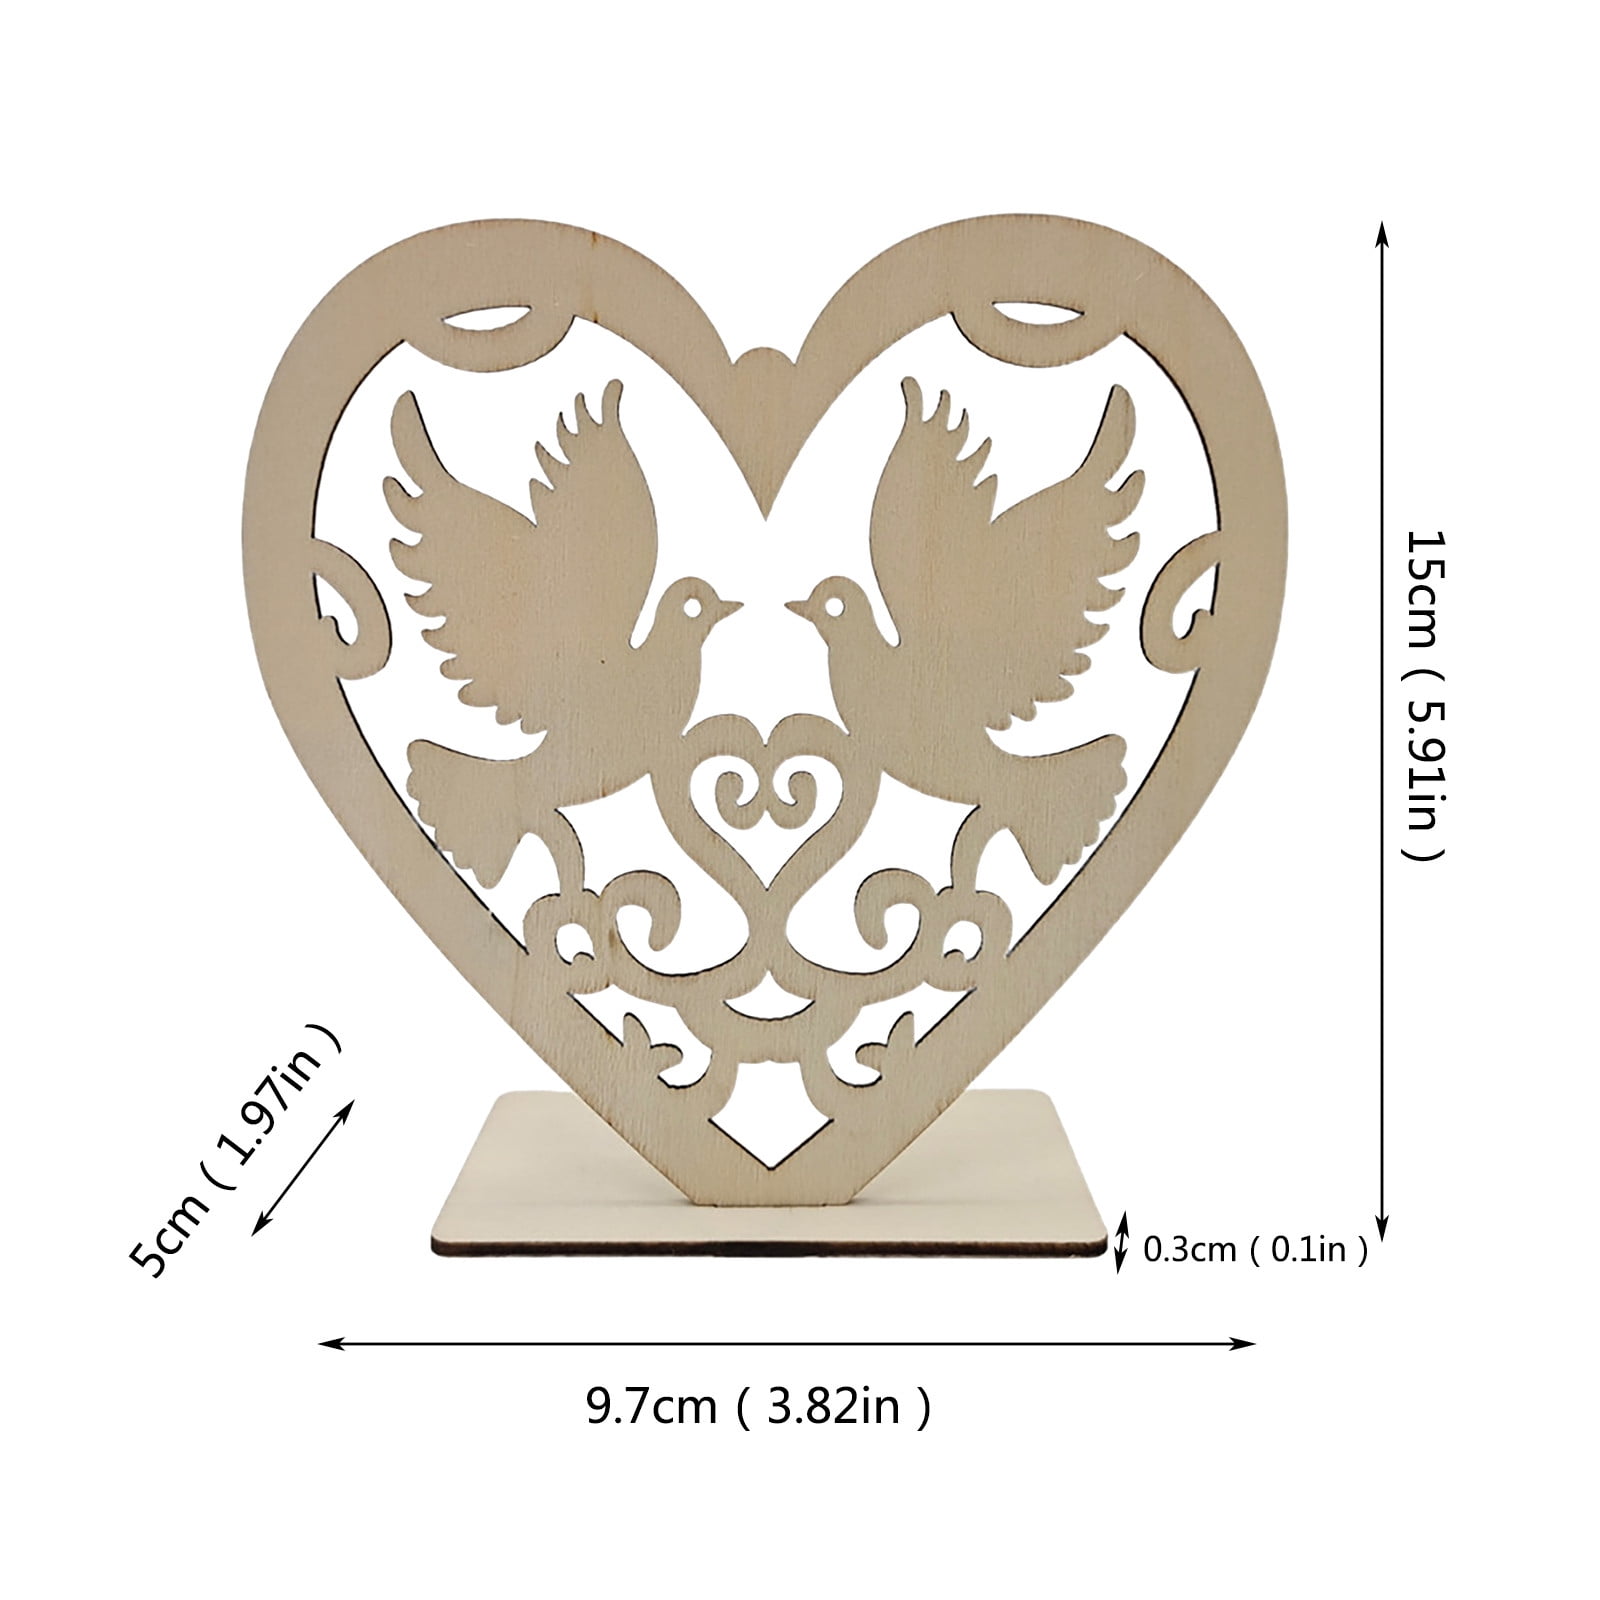  IMIKEYA 2pcs Love Bird Pendant Wood Heart Ornaments Home  Ornament Wood Love Ornament Unfinished Wood Heart Valentines Day Heart  Ornament Hanging Heart Decorate Wooden American Country : Home & Kitchen